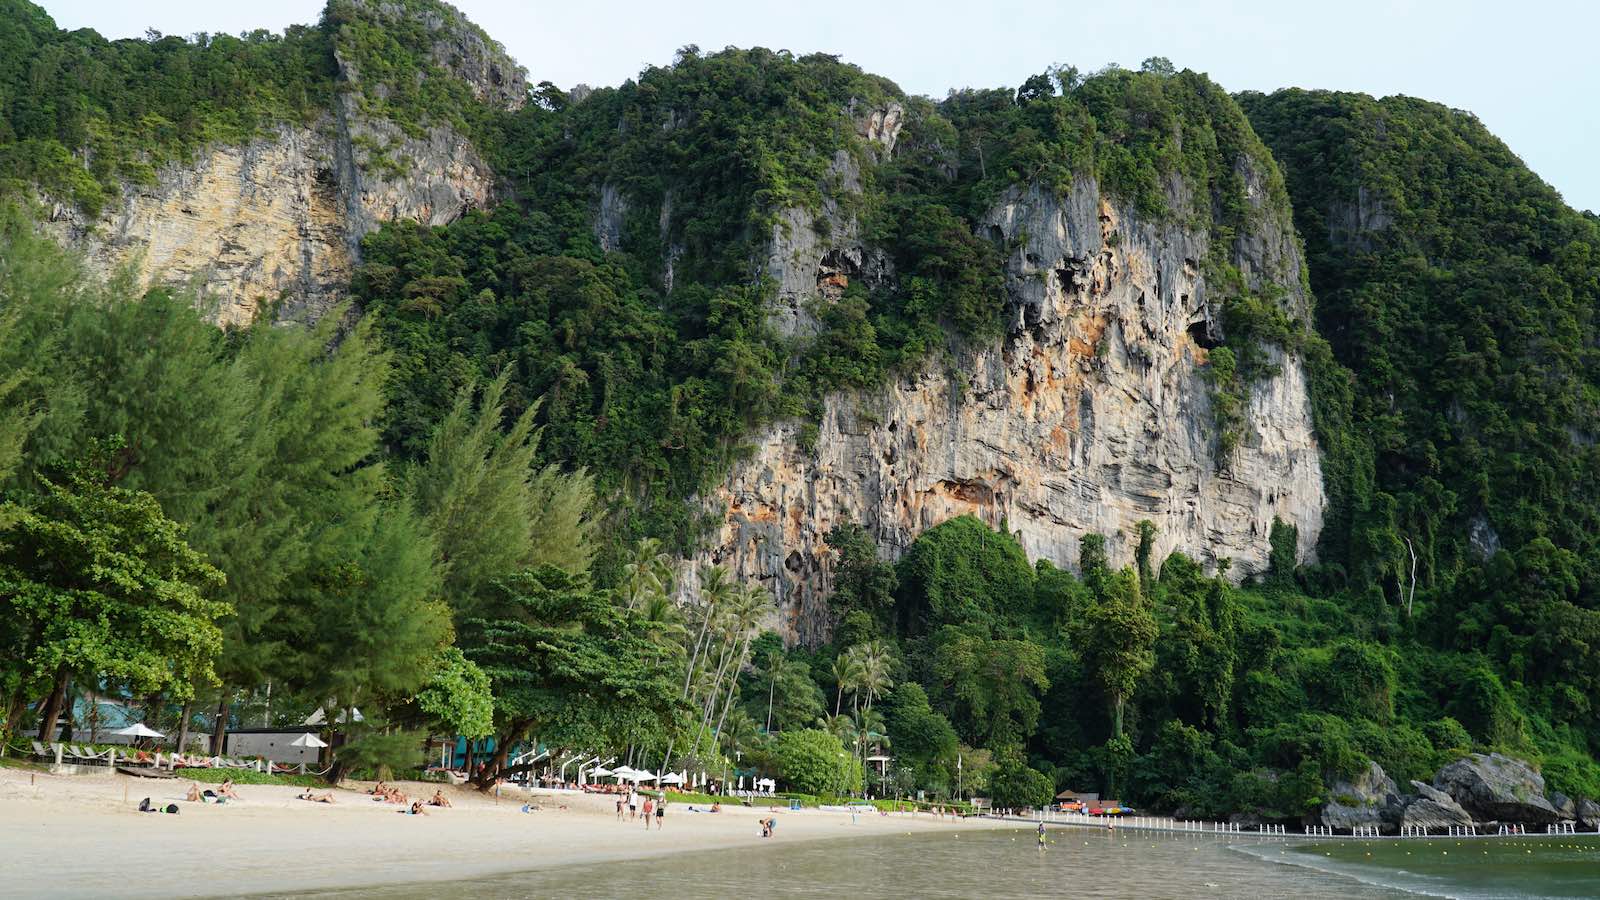 I spent my first day exploring the nearby beach and found a little path at one end that led me around one of these massive limestone cliffs to a much smaller and less crowded side beach.